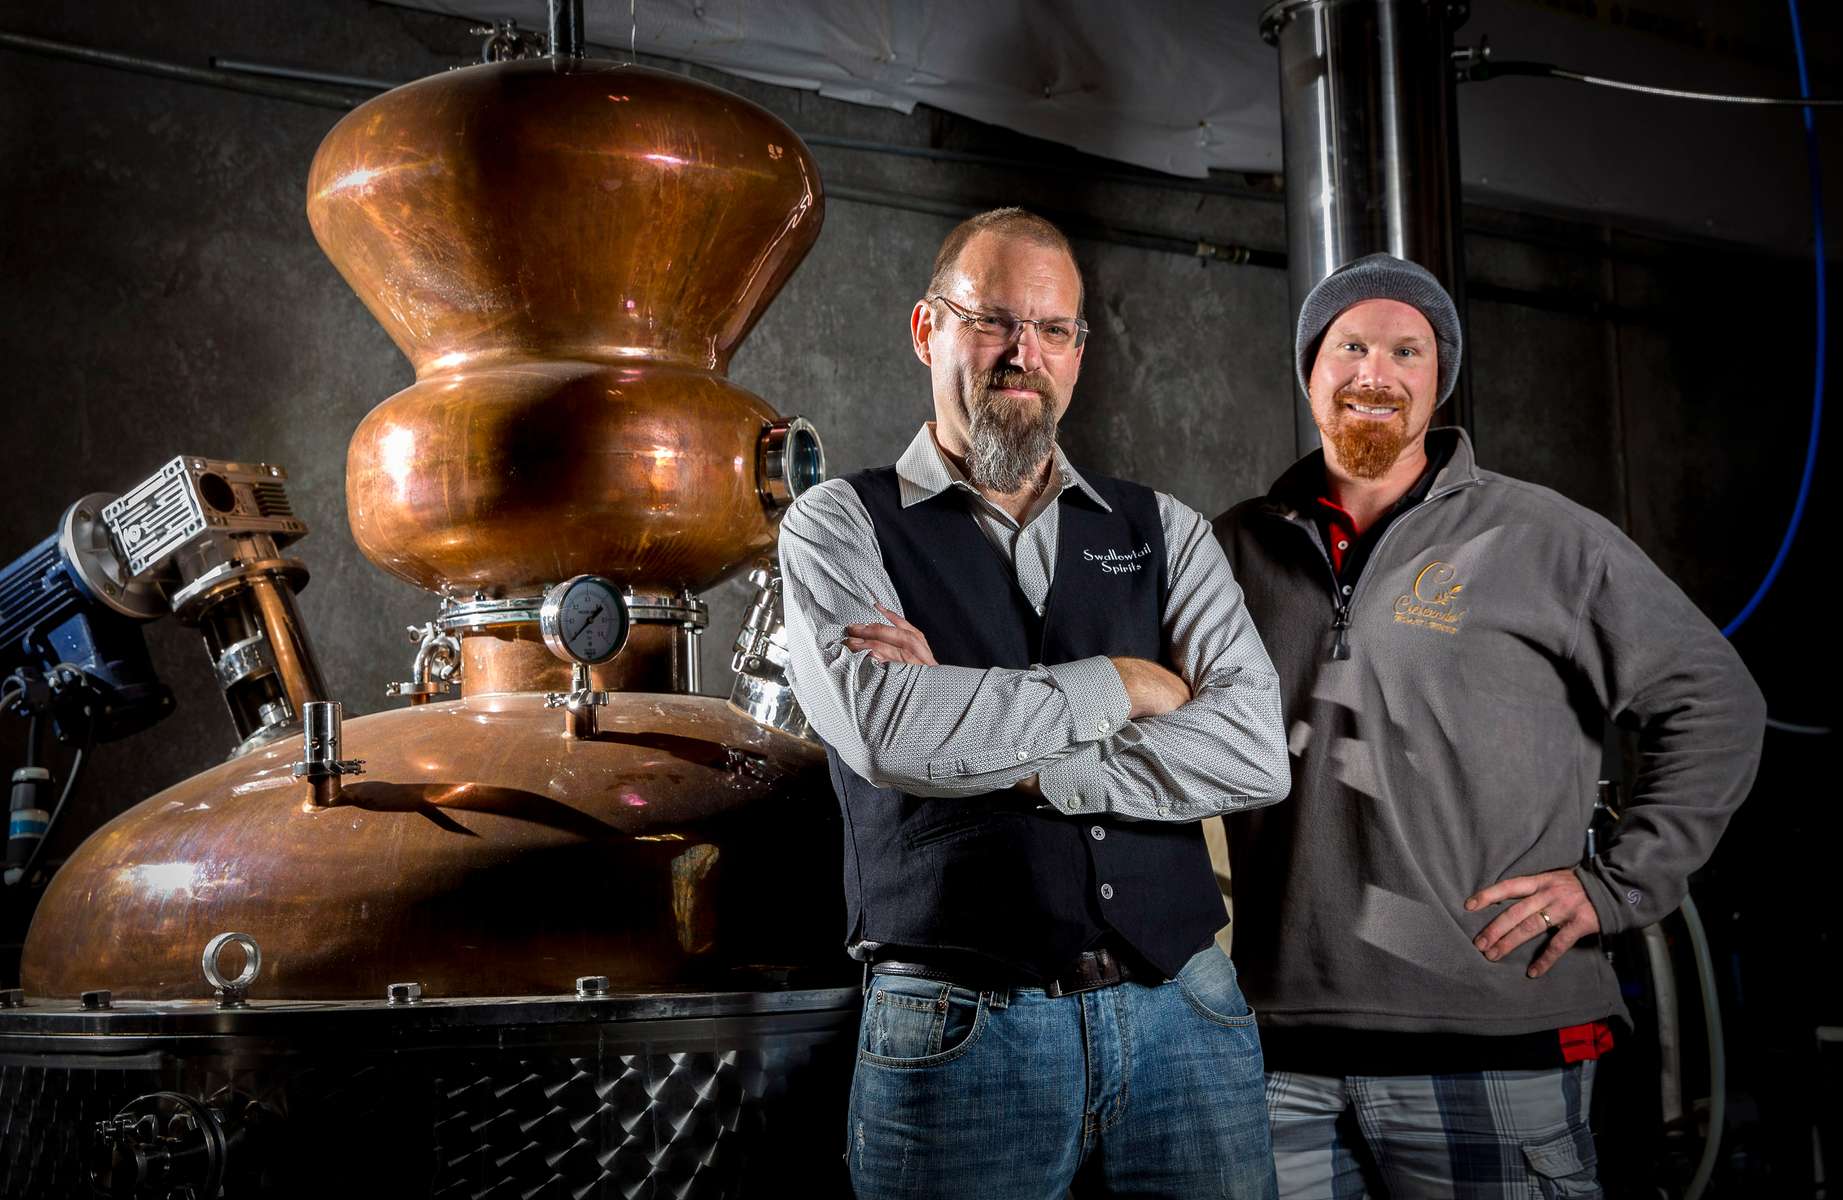 Kevin Barrett, owner of Swallowtail Spirits in Springfield,  and Kyle Akin, owner of Crescendo Spirits in Eugene, are among the main organizers of the Southern Willamette Craft Distillers, a group of local spirits distillers who are trying to raise the visibility of their buisinesses by offering a “passport” to the public that provides free tastings and other perks. The group also is working with the larger Oregon Distillers Guild to lobby for regulation changes and reduced state taxes on their industry.